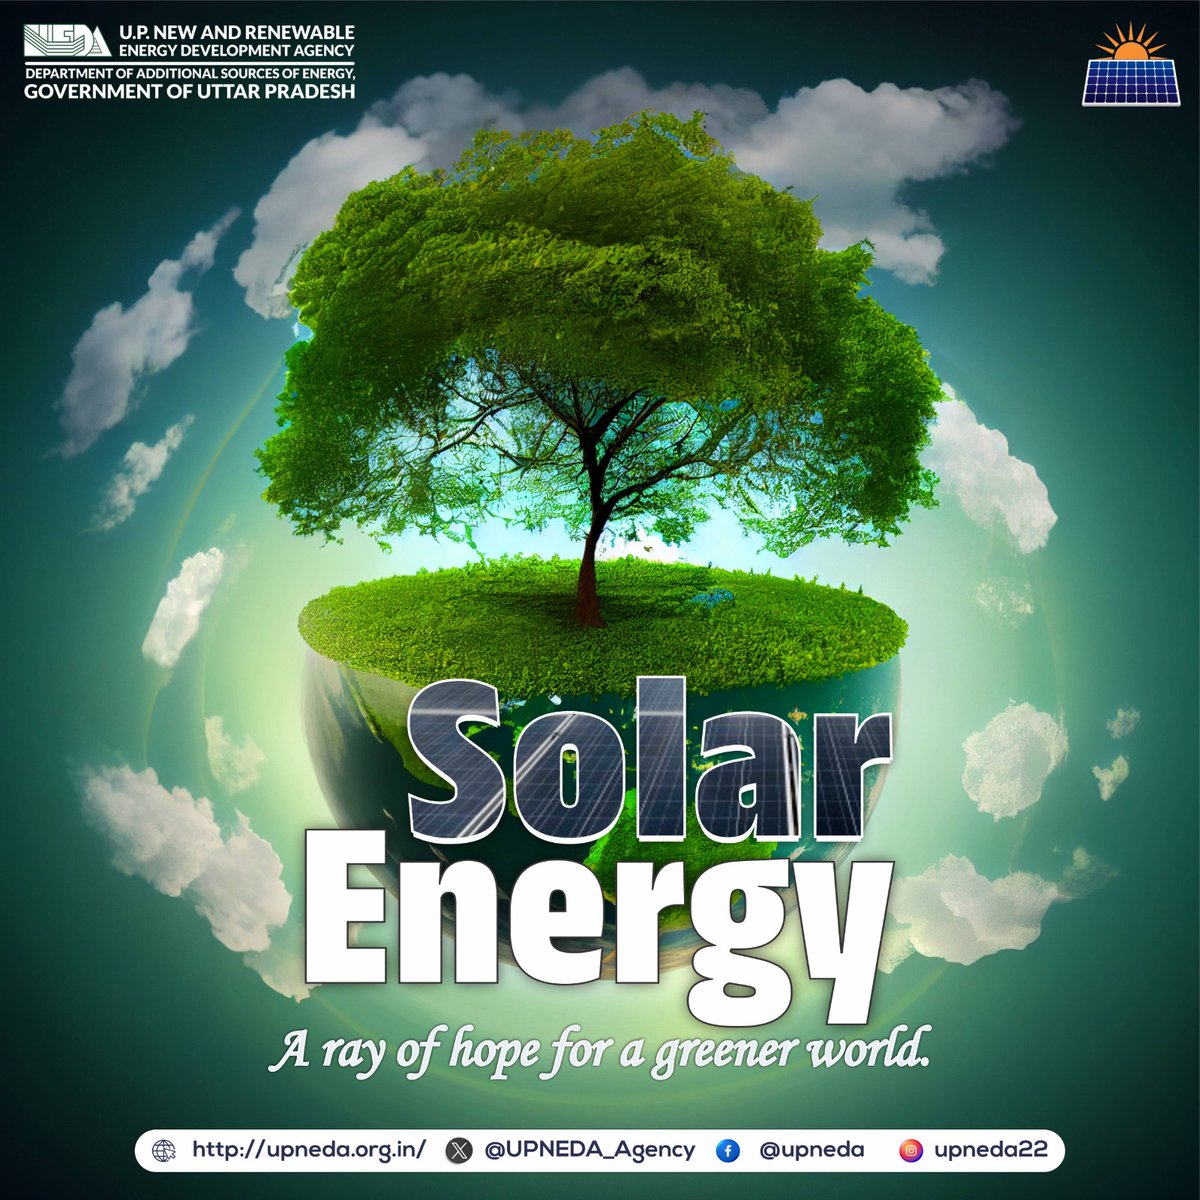 Solar energy: a ray of hope for a greener world! Let's embrace the power of the sun to create a brighter, more sustainable future.
 
#SolarEnergy #CleanEnergy #RenewableEnergy 
#SolarPower #UPNEDA #upneda_agency
@CMOfficeUP
@aksharmaBharat
@isomendratomar
@ChiefSecyUP